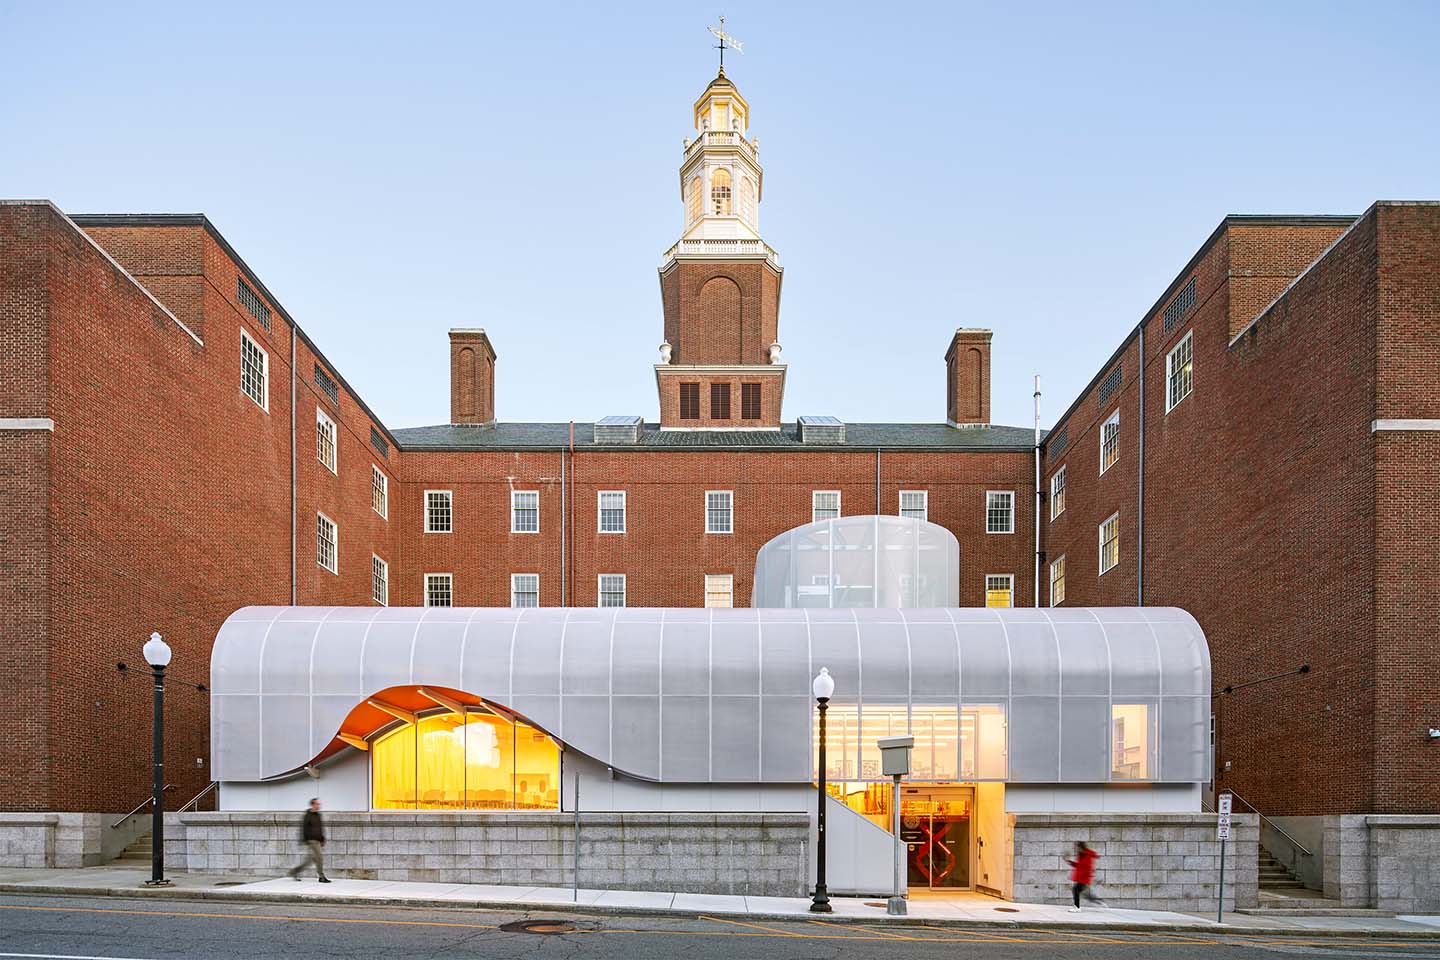 View of RISD’s main building, 20 Washington Place, at dusk. Building is a mix of traditional brickwork and contemporary architectural elements.